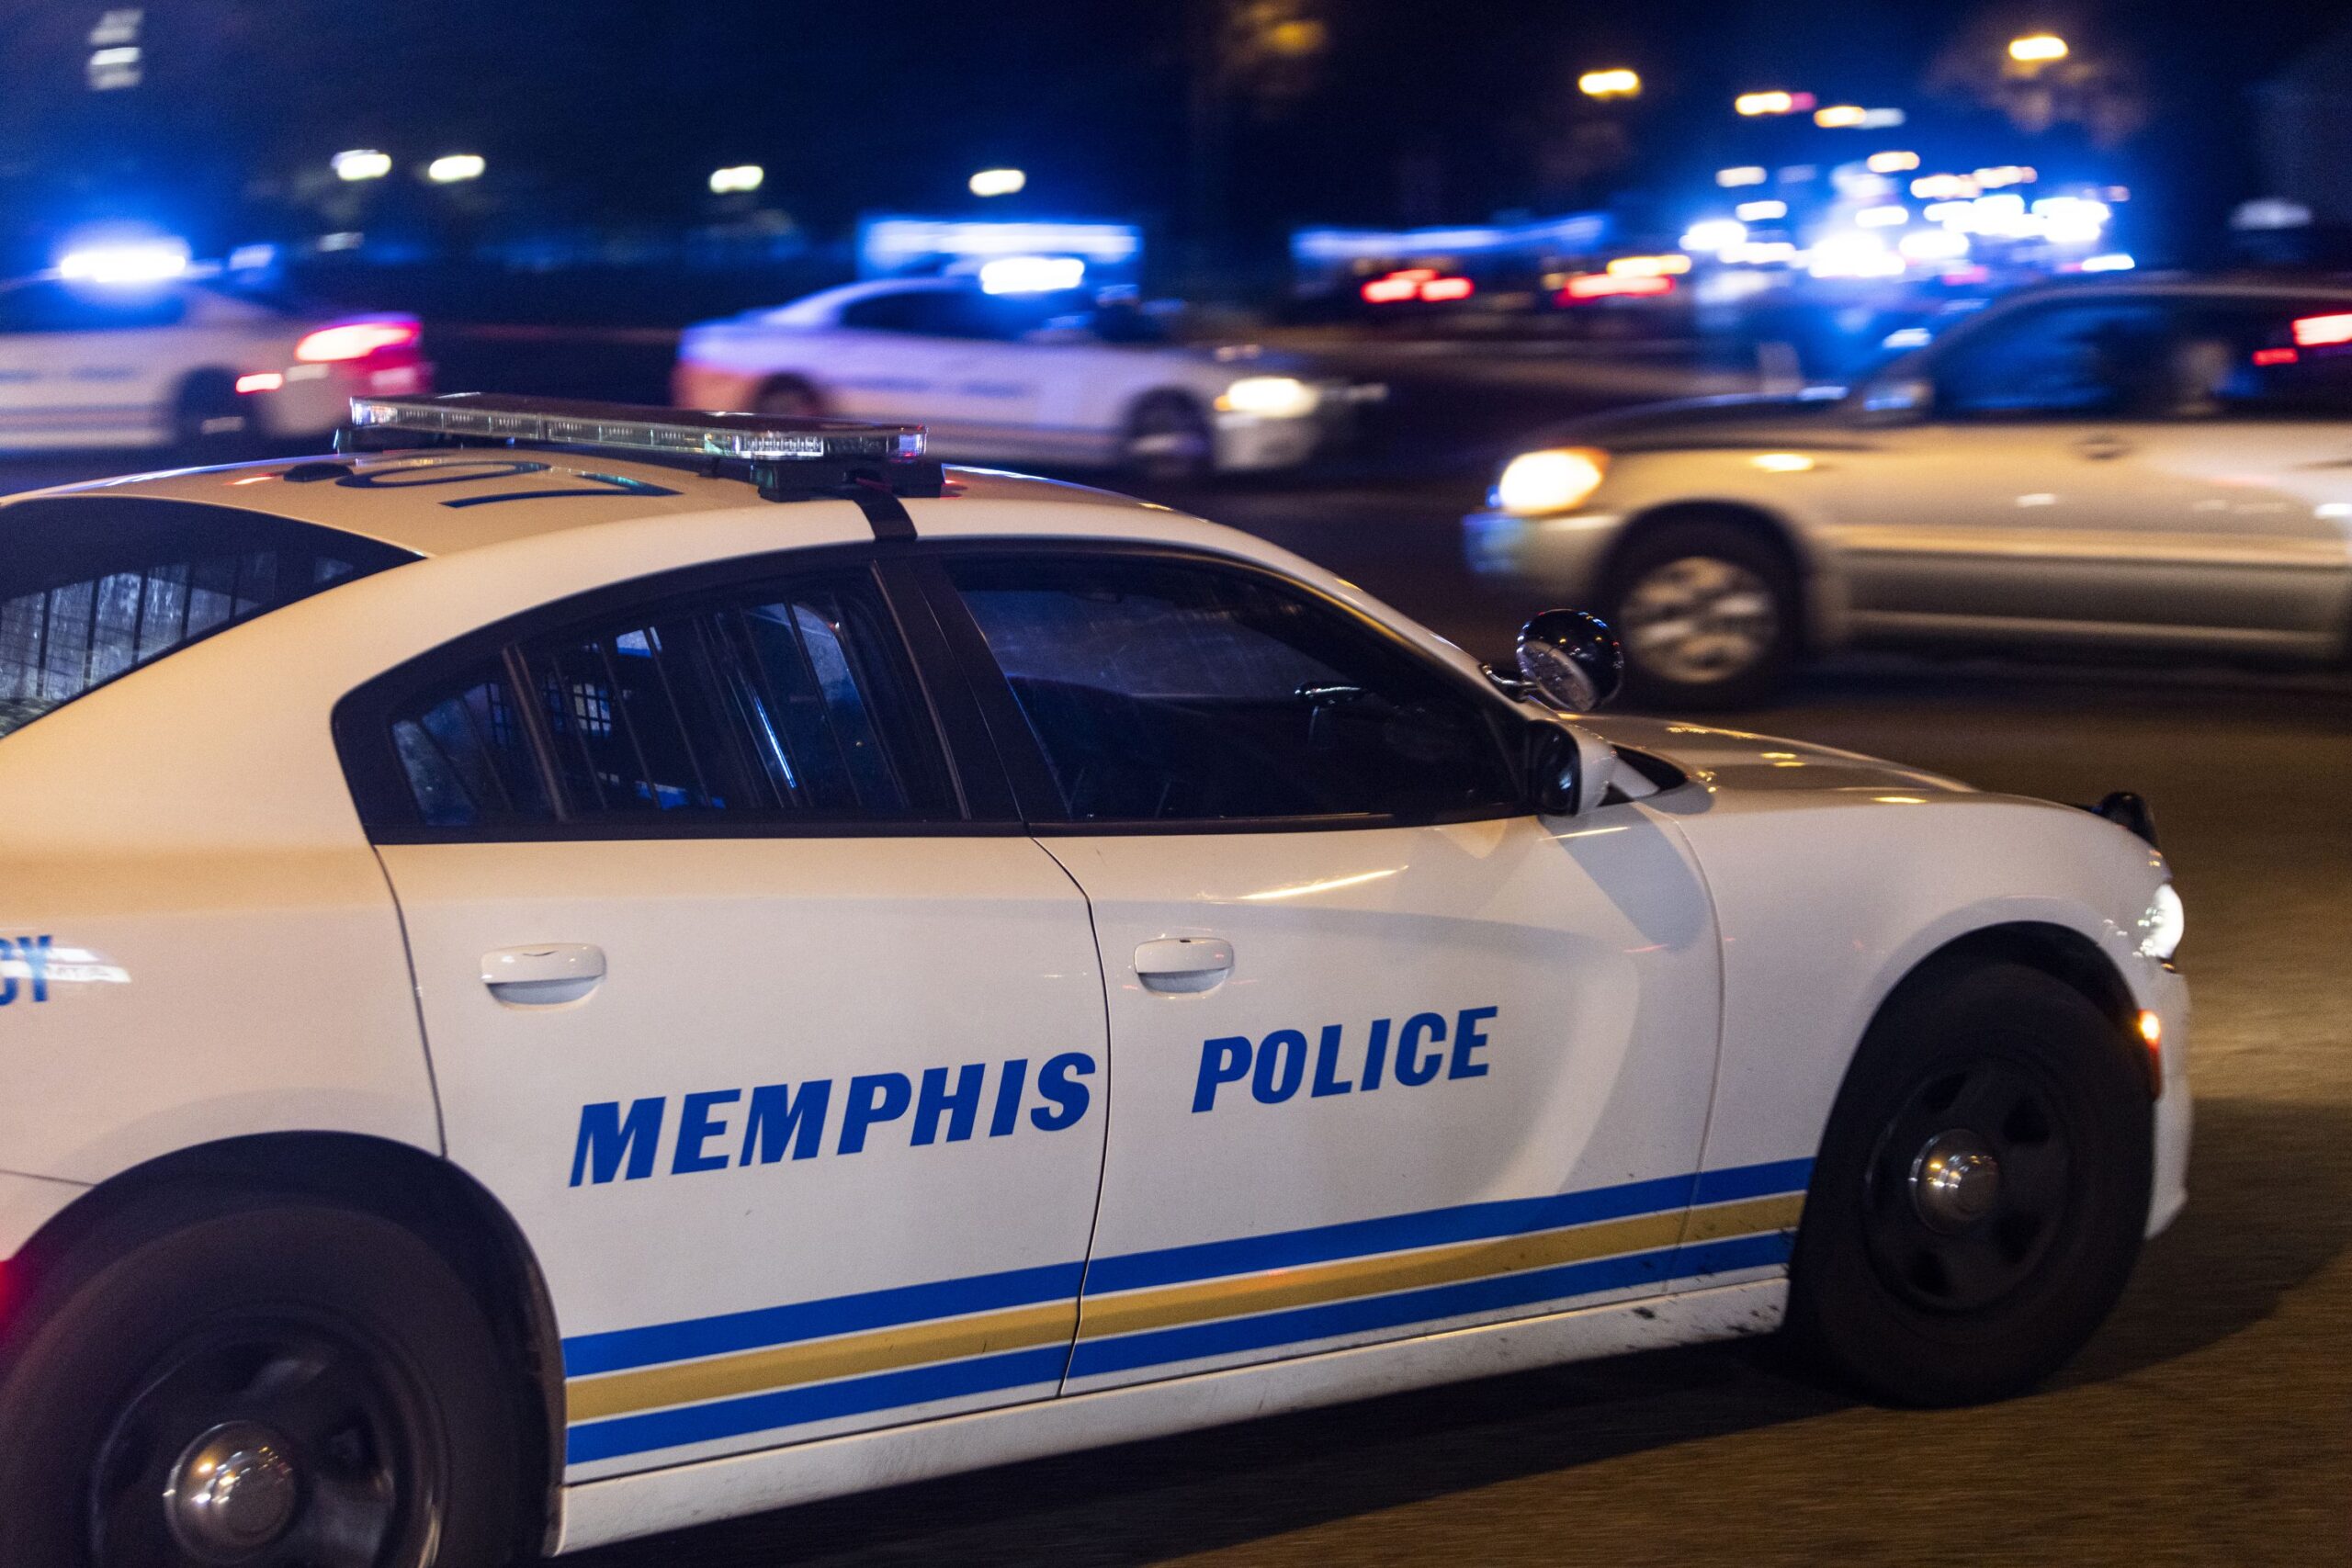 Memphis police cars are seen in this file image from Sept. 7, 2022.
(Brad Vest, Getty Images)...